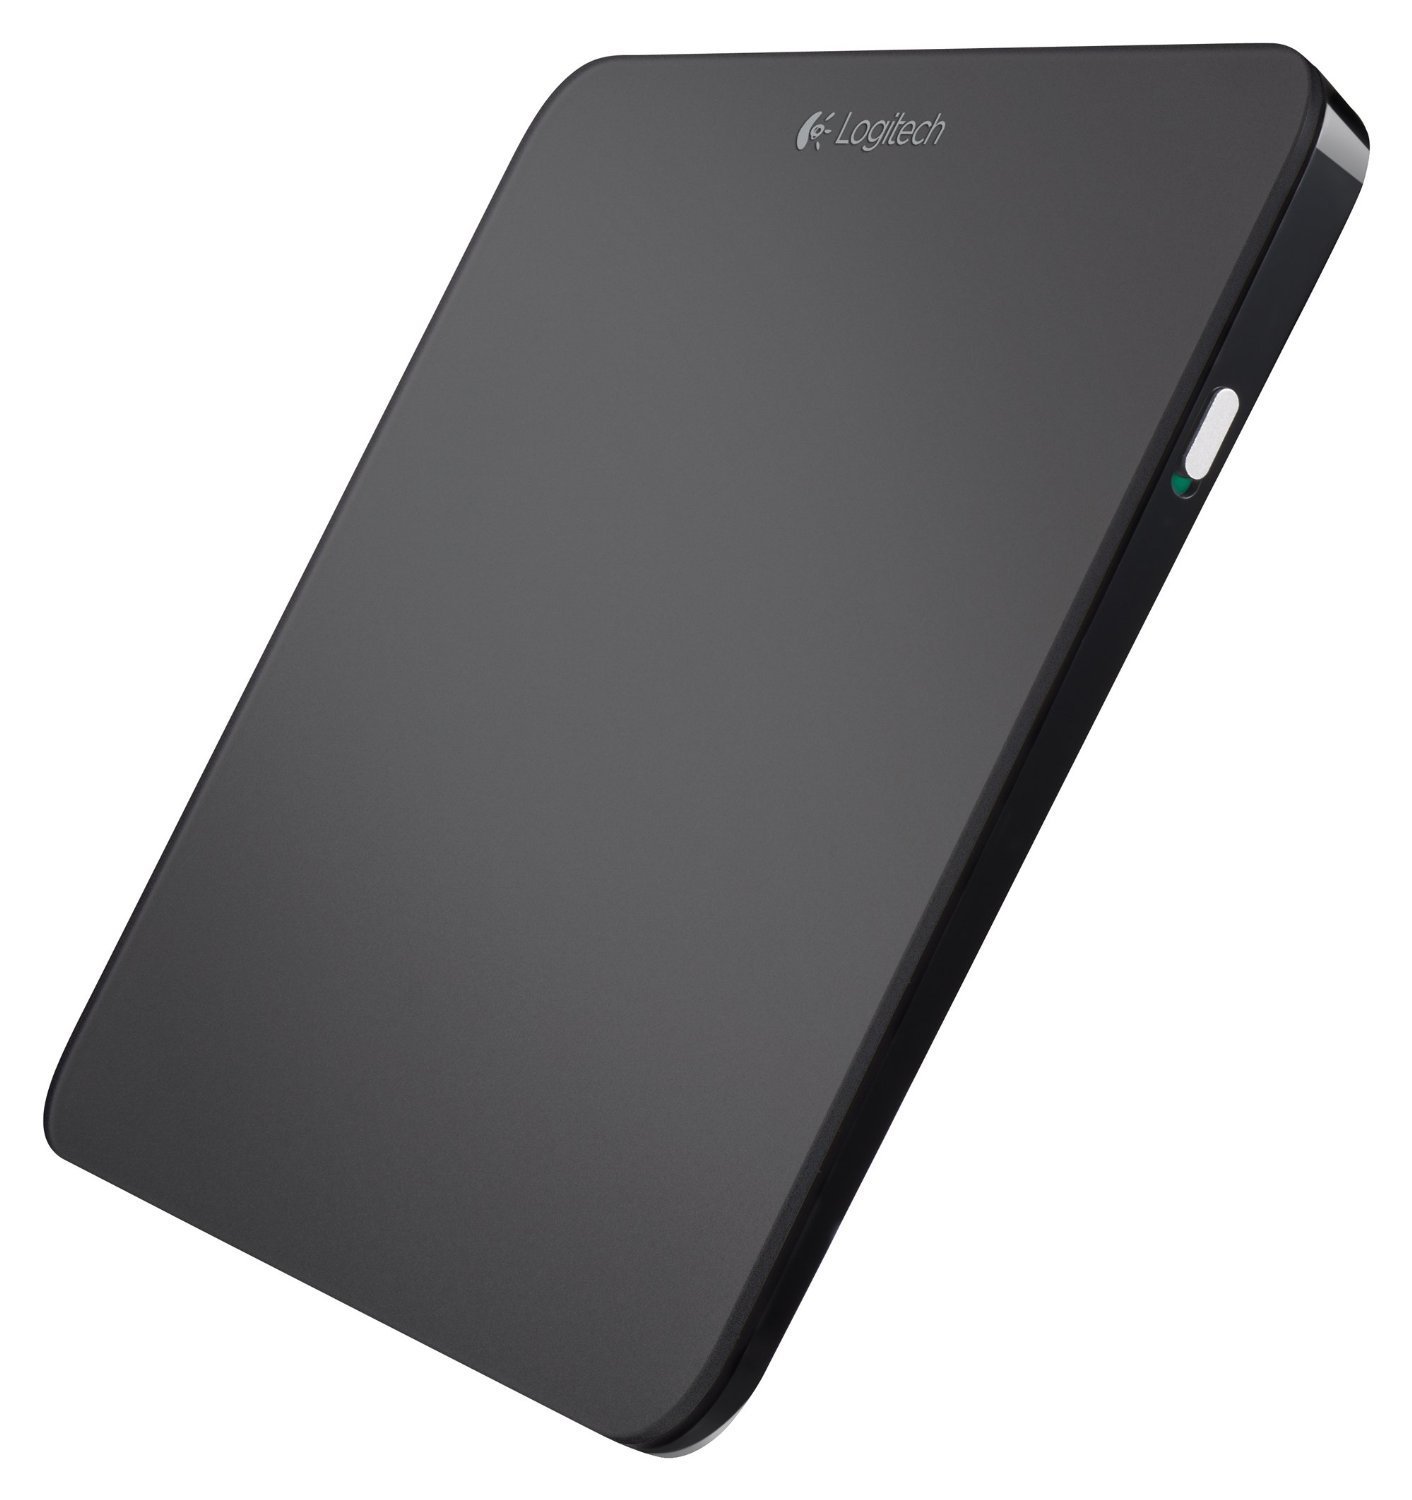 Logitech Rechargeable Touchpad T650 with Windows 8 Multi-Touch Navigation - Black (Certified Refurbished)